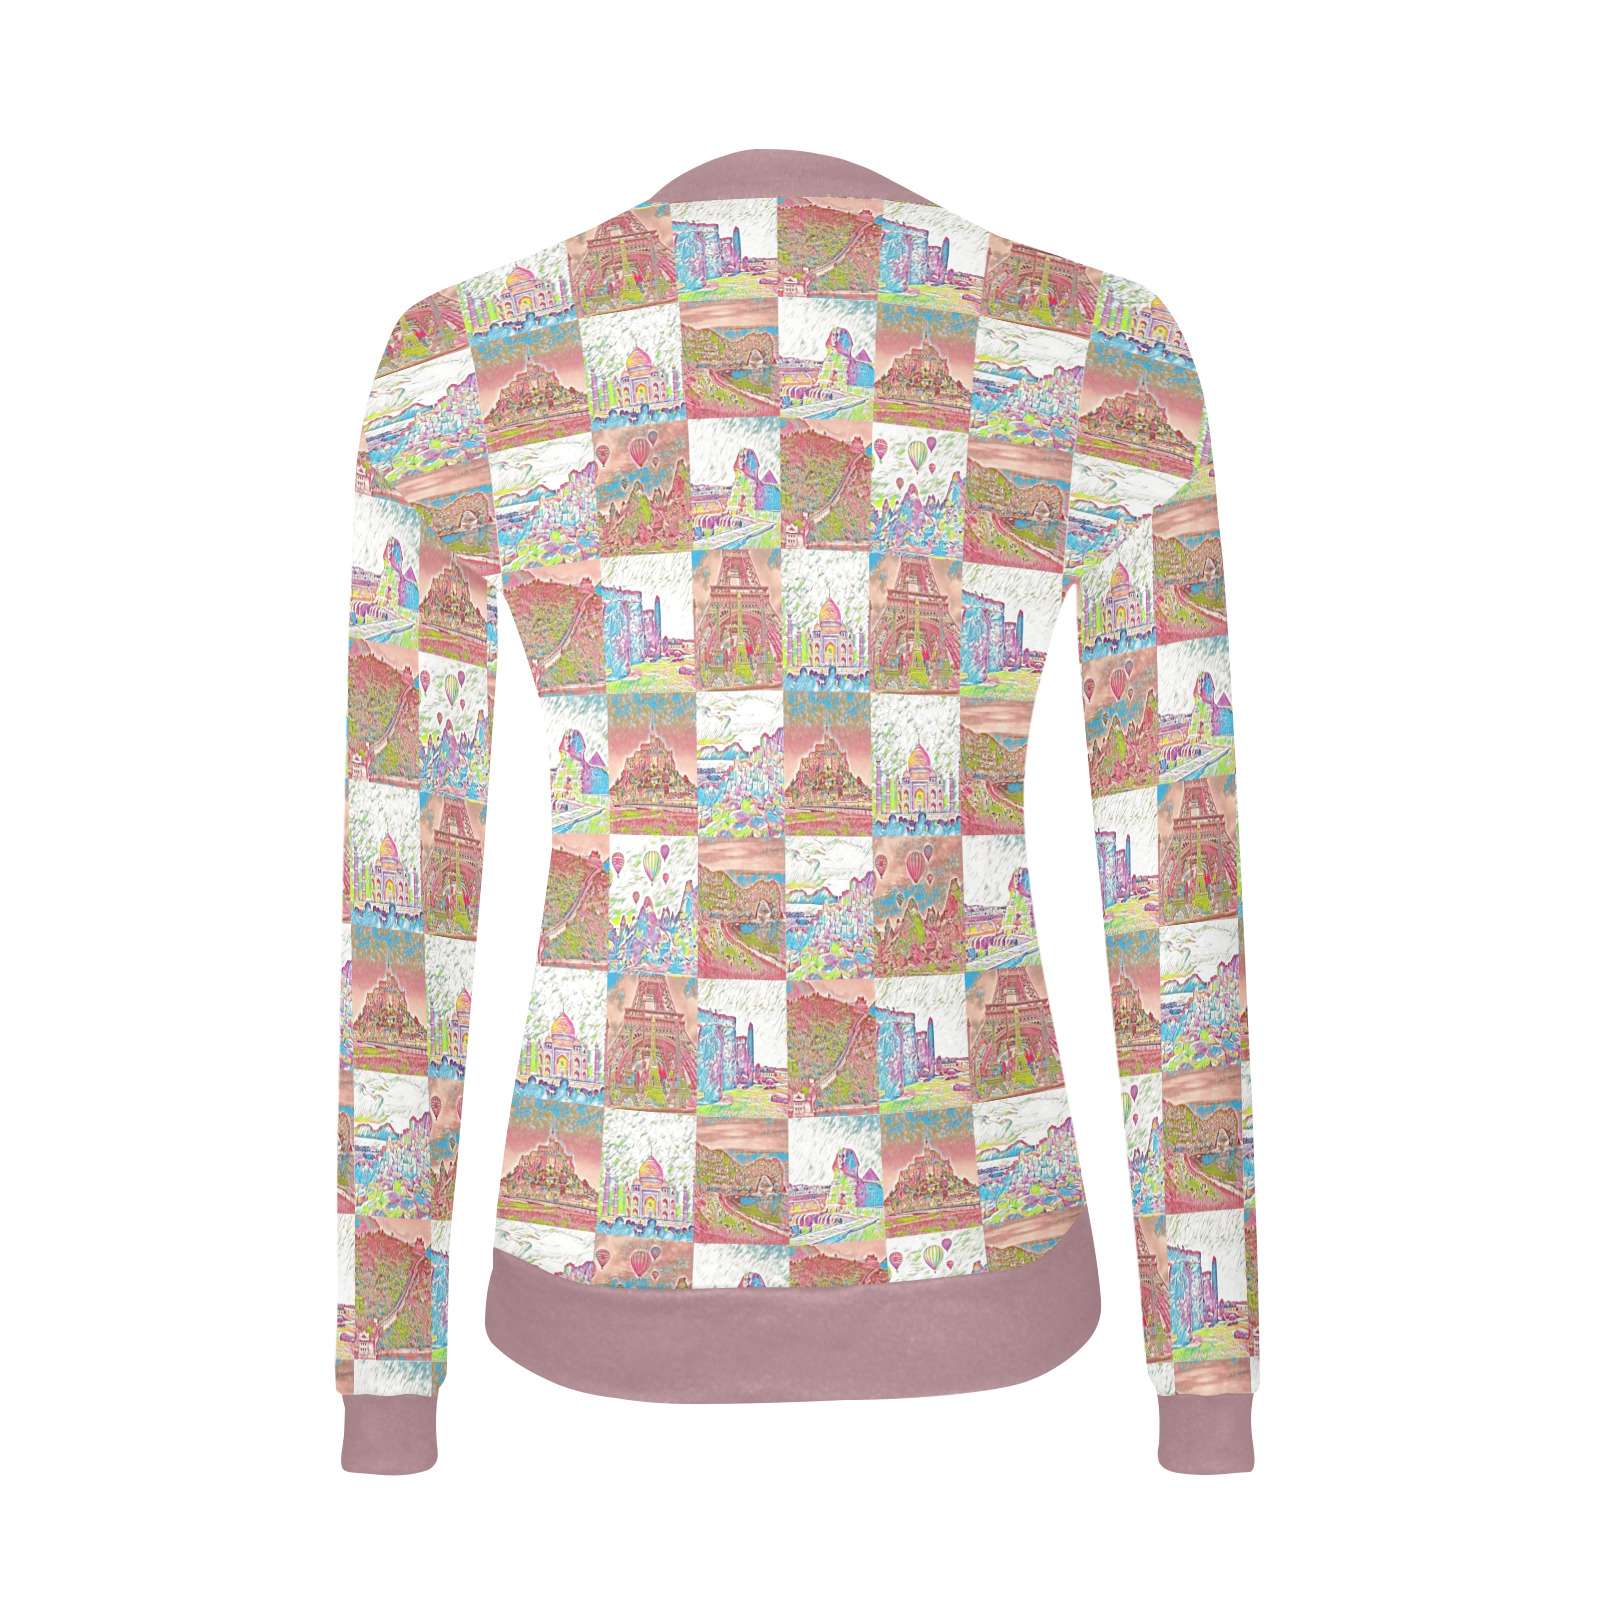 Big Pink and White World travel Collage Pattern Women's All Over Print V-Neck Sweater (Model H48)